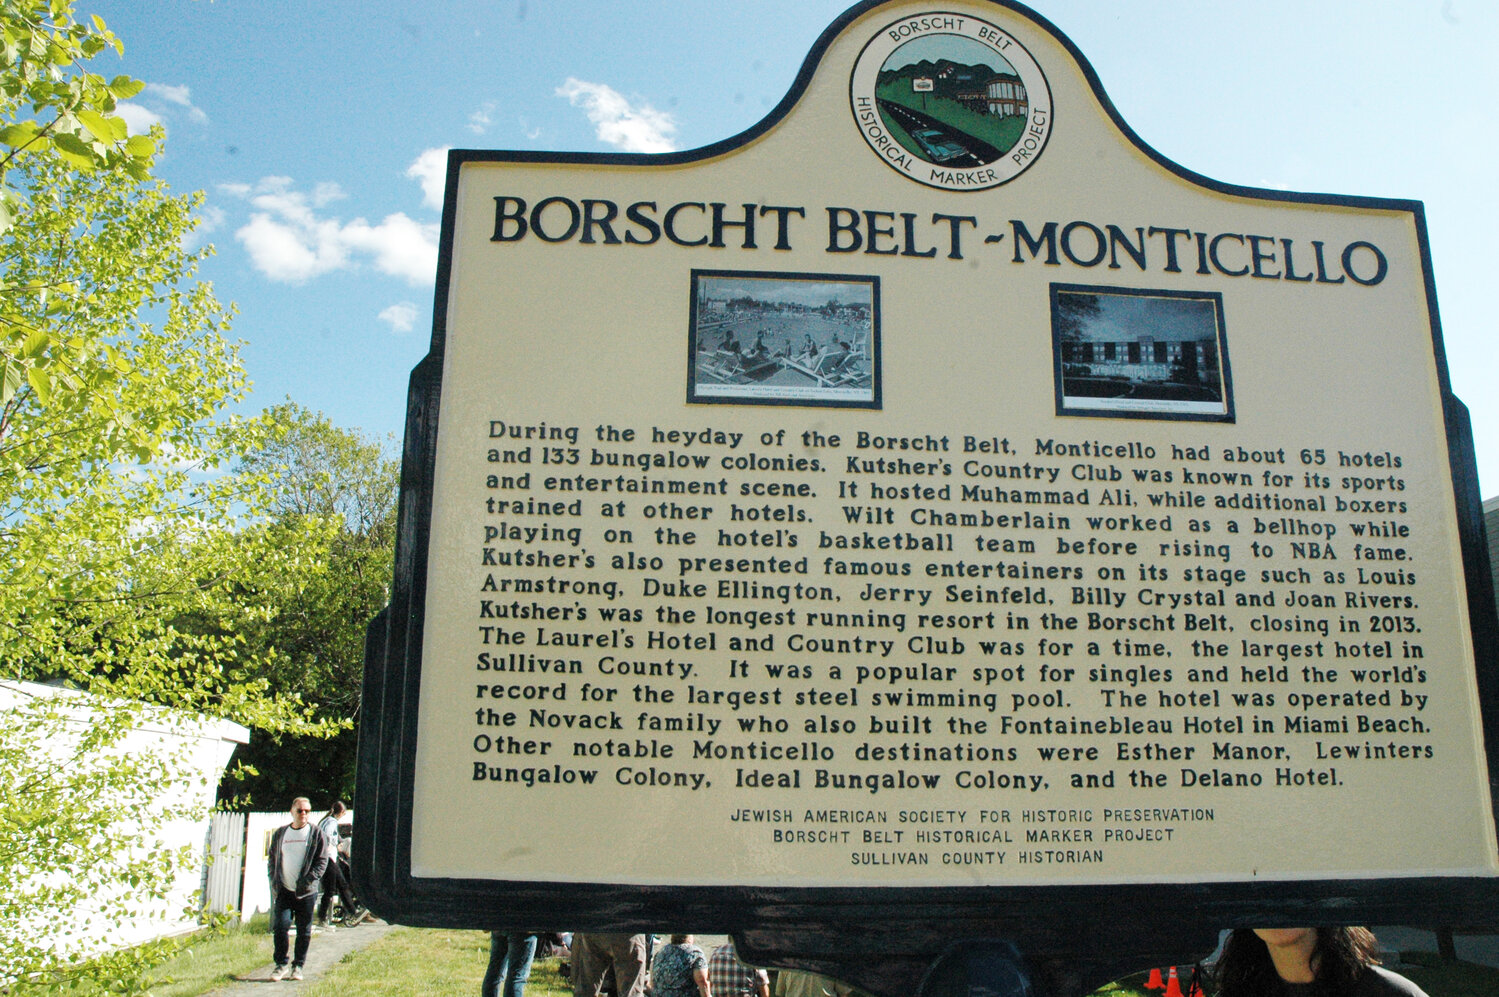 All 20 of the planned markers for the Borscht Belt Historical Marker Project will have a description of the impact the Borscht Belt had on that town.